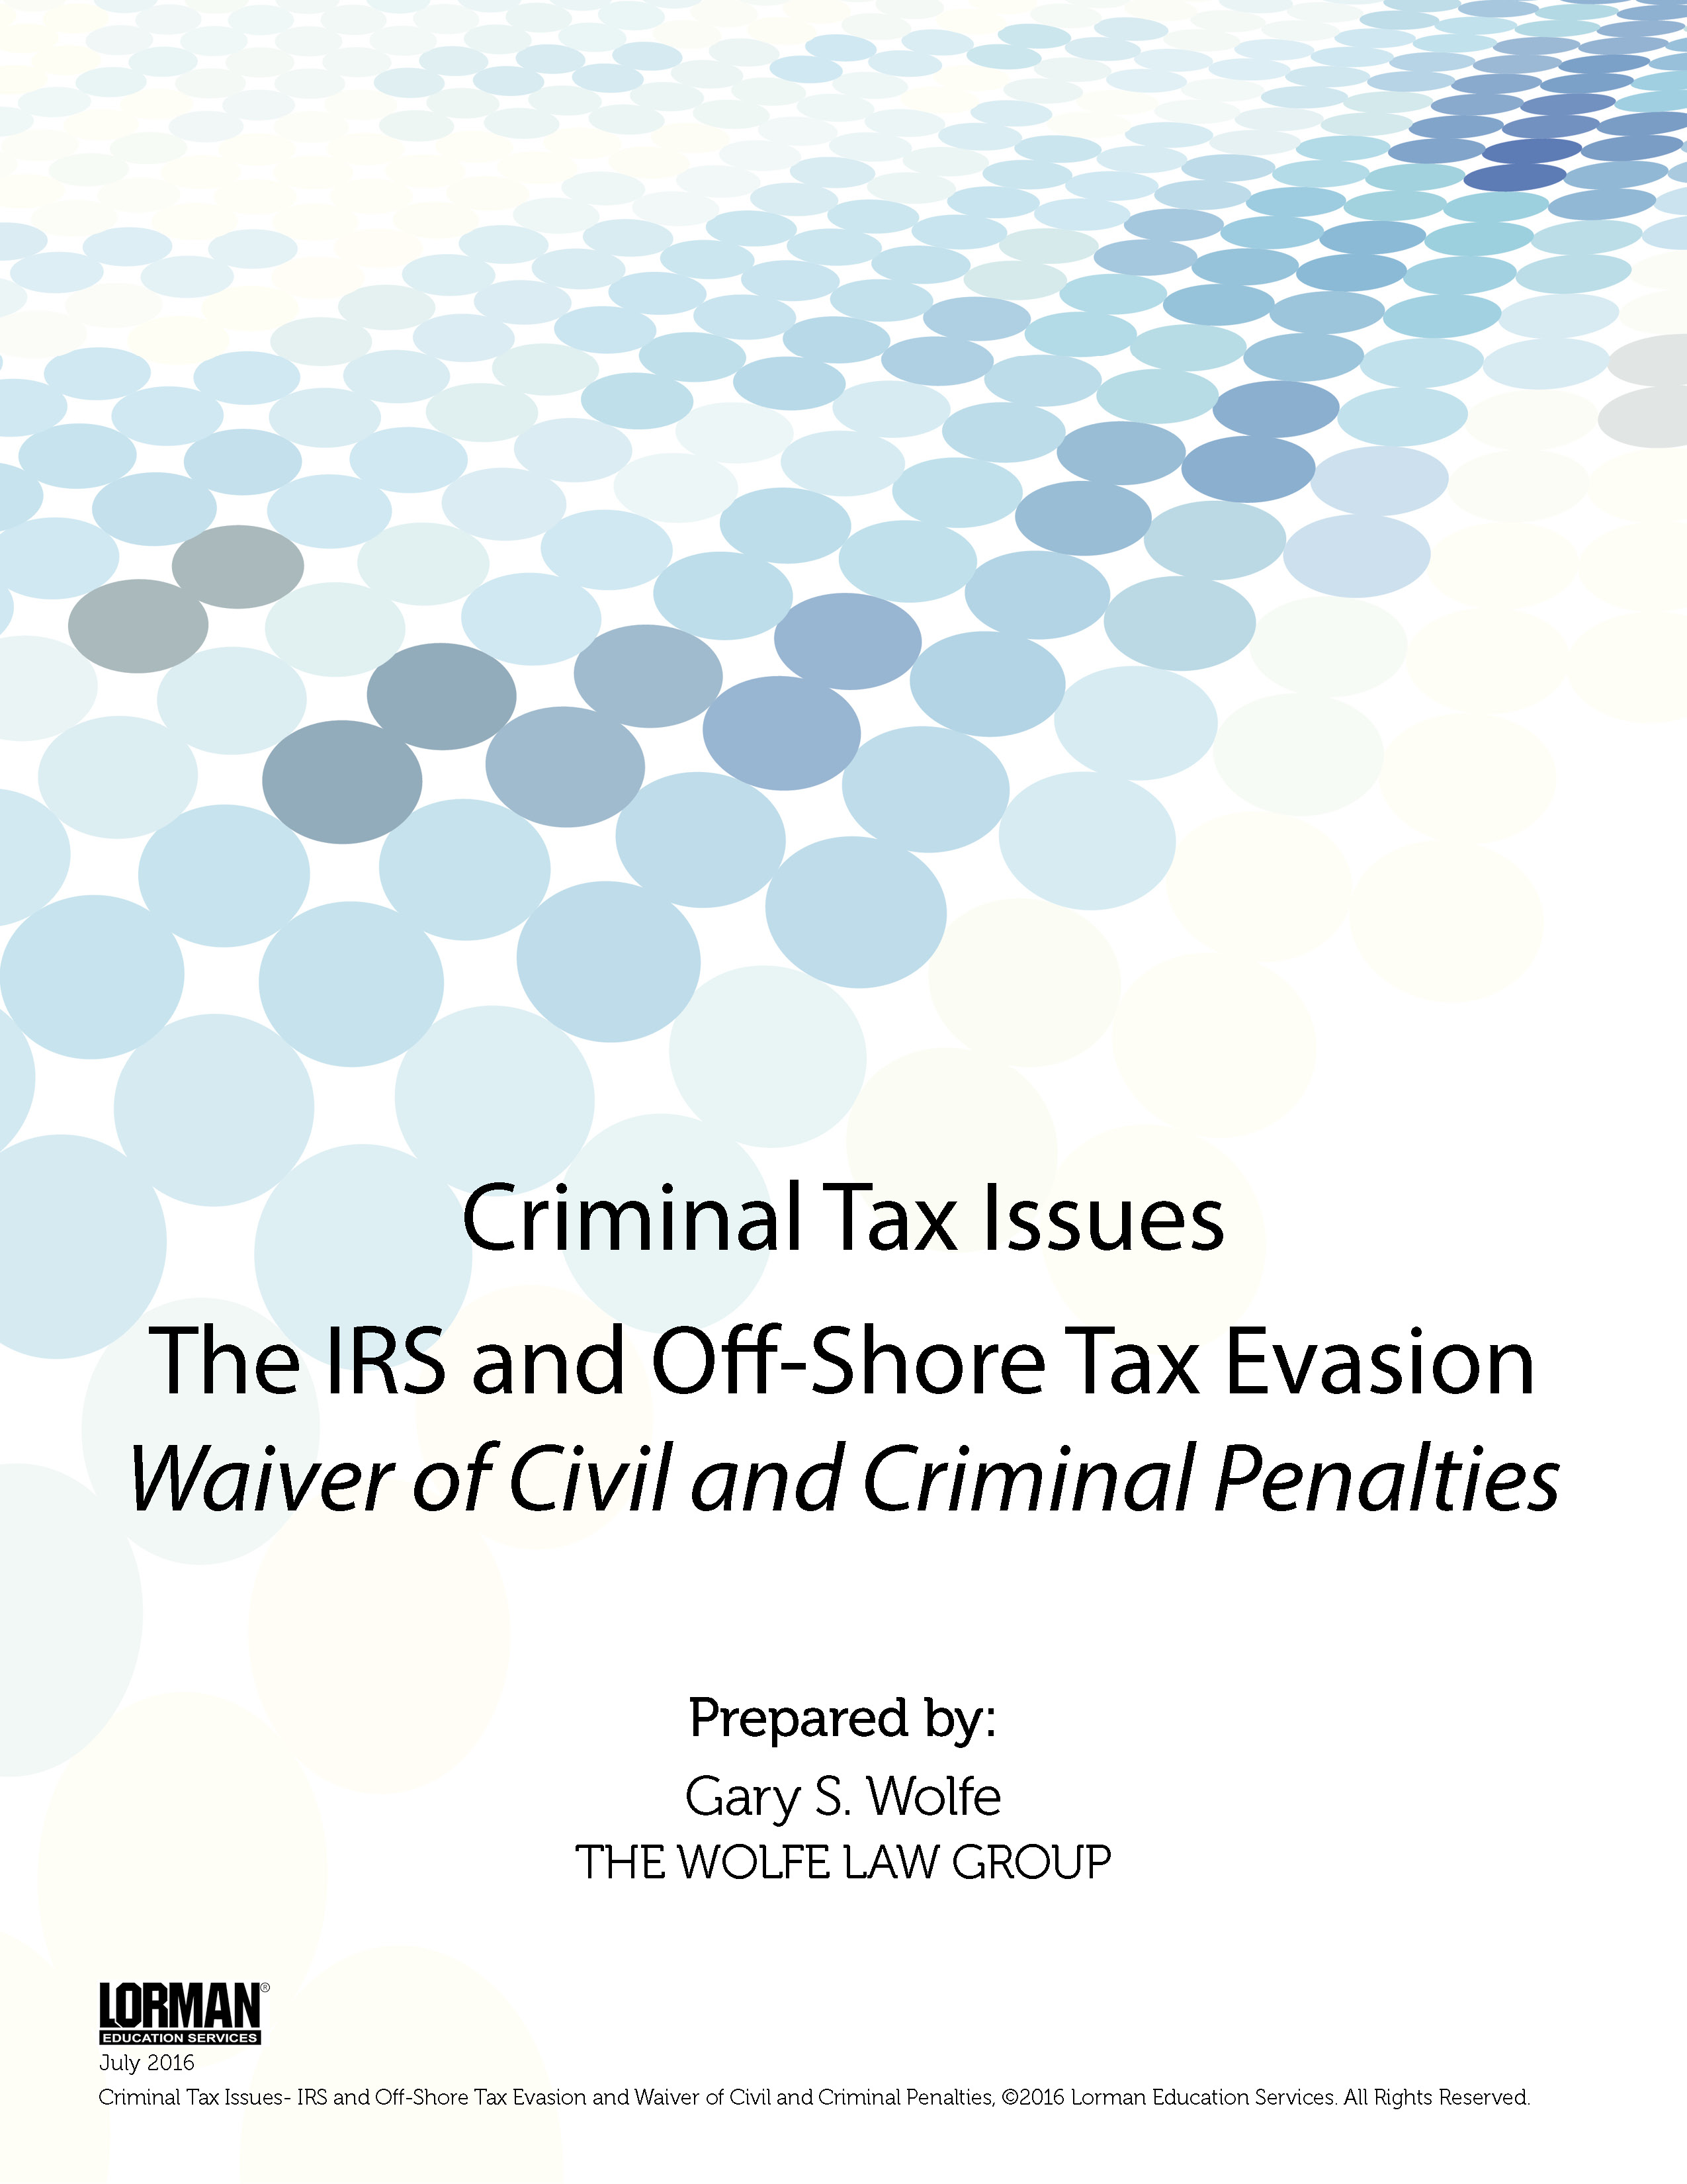 Criminal Tax Issues- IRS and Off-Shore Tax Evasion and Waiver of Civil and Criminal Penalties